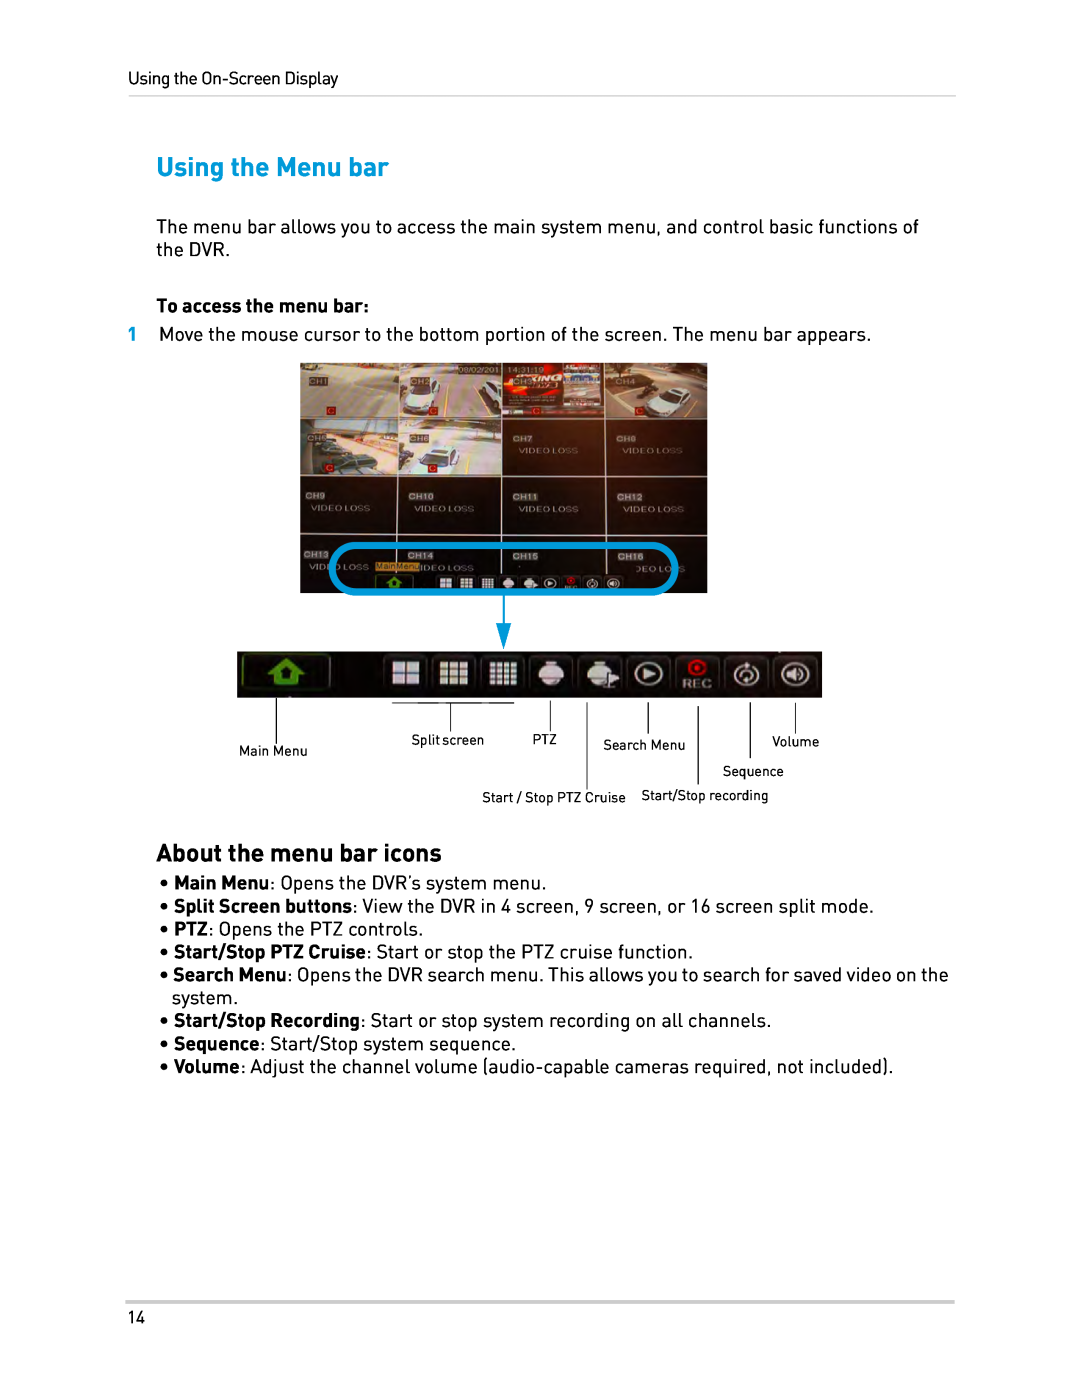 Lorex 16 channel security dvr with 500GB hard drive, remote viewing manual Using the Menu bar, About the menu bar icons 